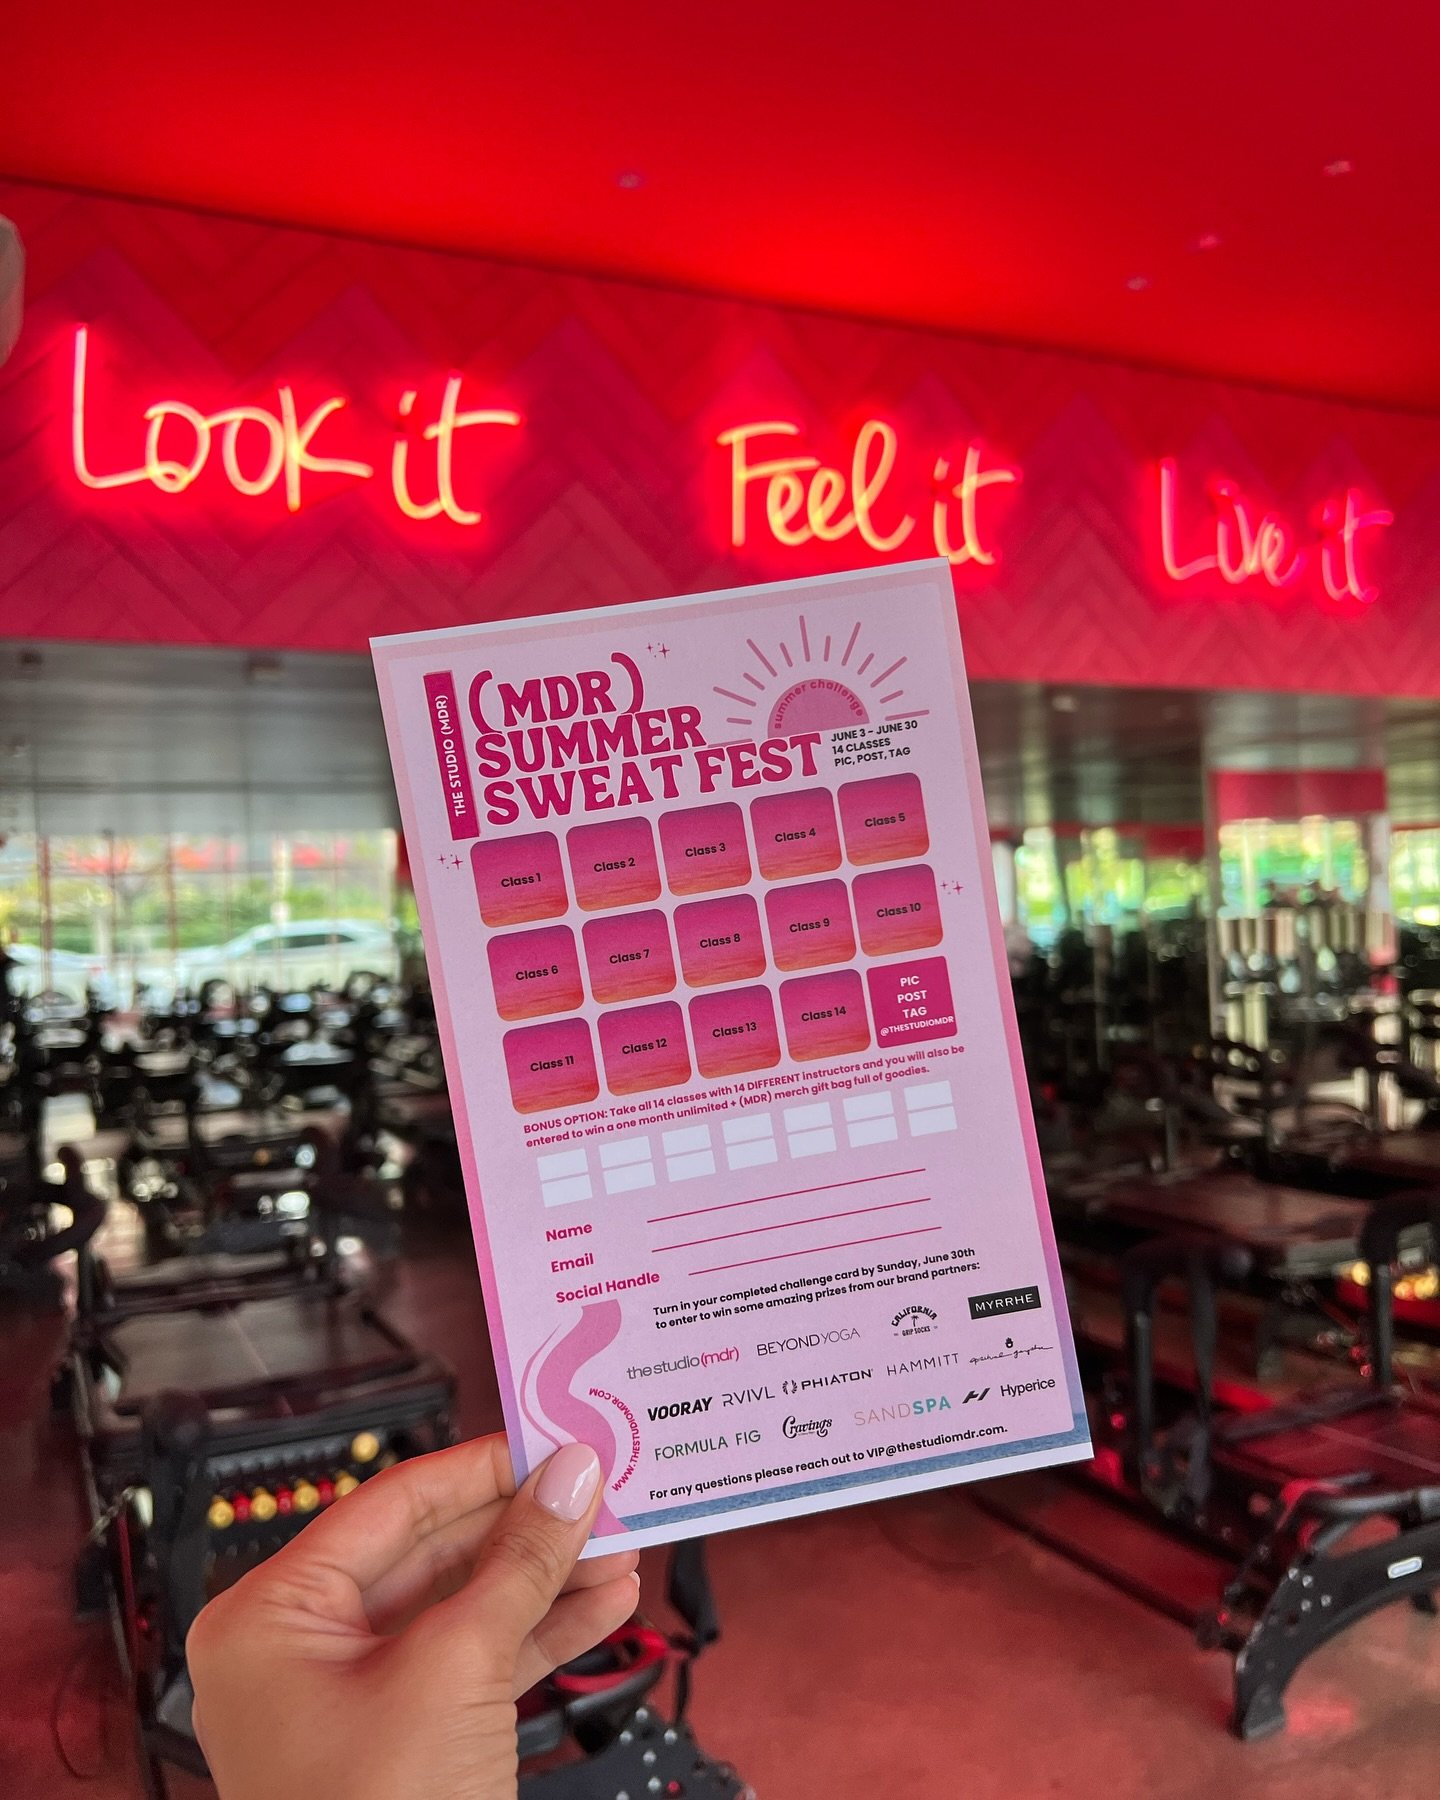 TODAY IS THE DAY! The (MDR) Summer Sweat Fest Challenge has officially begun! 💪🩷🎉 To participate, all you have to do is pick up your challenge card at any studio location and start taking classes! ⁣
⁣
Challenge Details: ⁣
⁣
1. Take 14 classes in 4